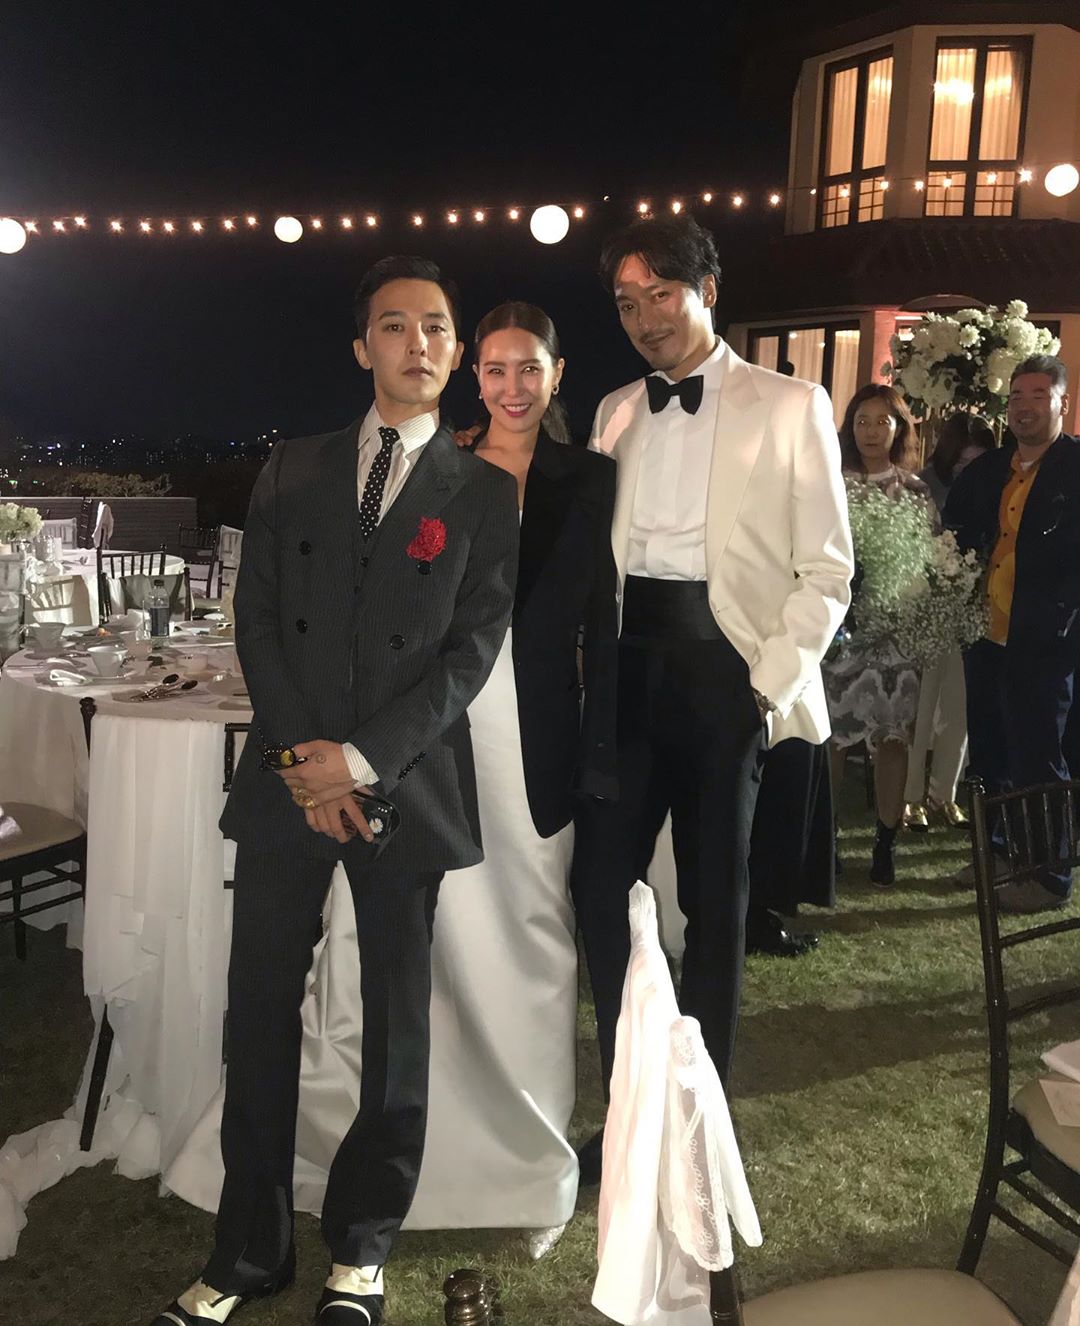 photos-dami-kwon-s-instagram-update-from-her-wedding-featuring-photos-with-g-dragon-posted-on-2019-10-12